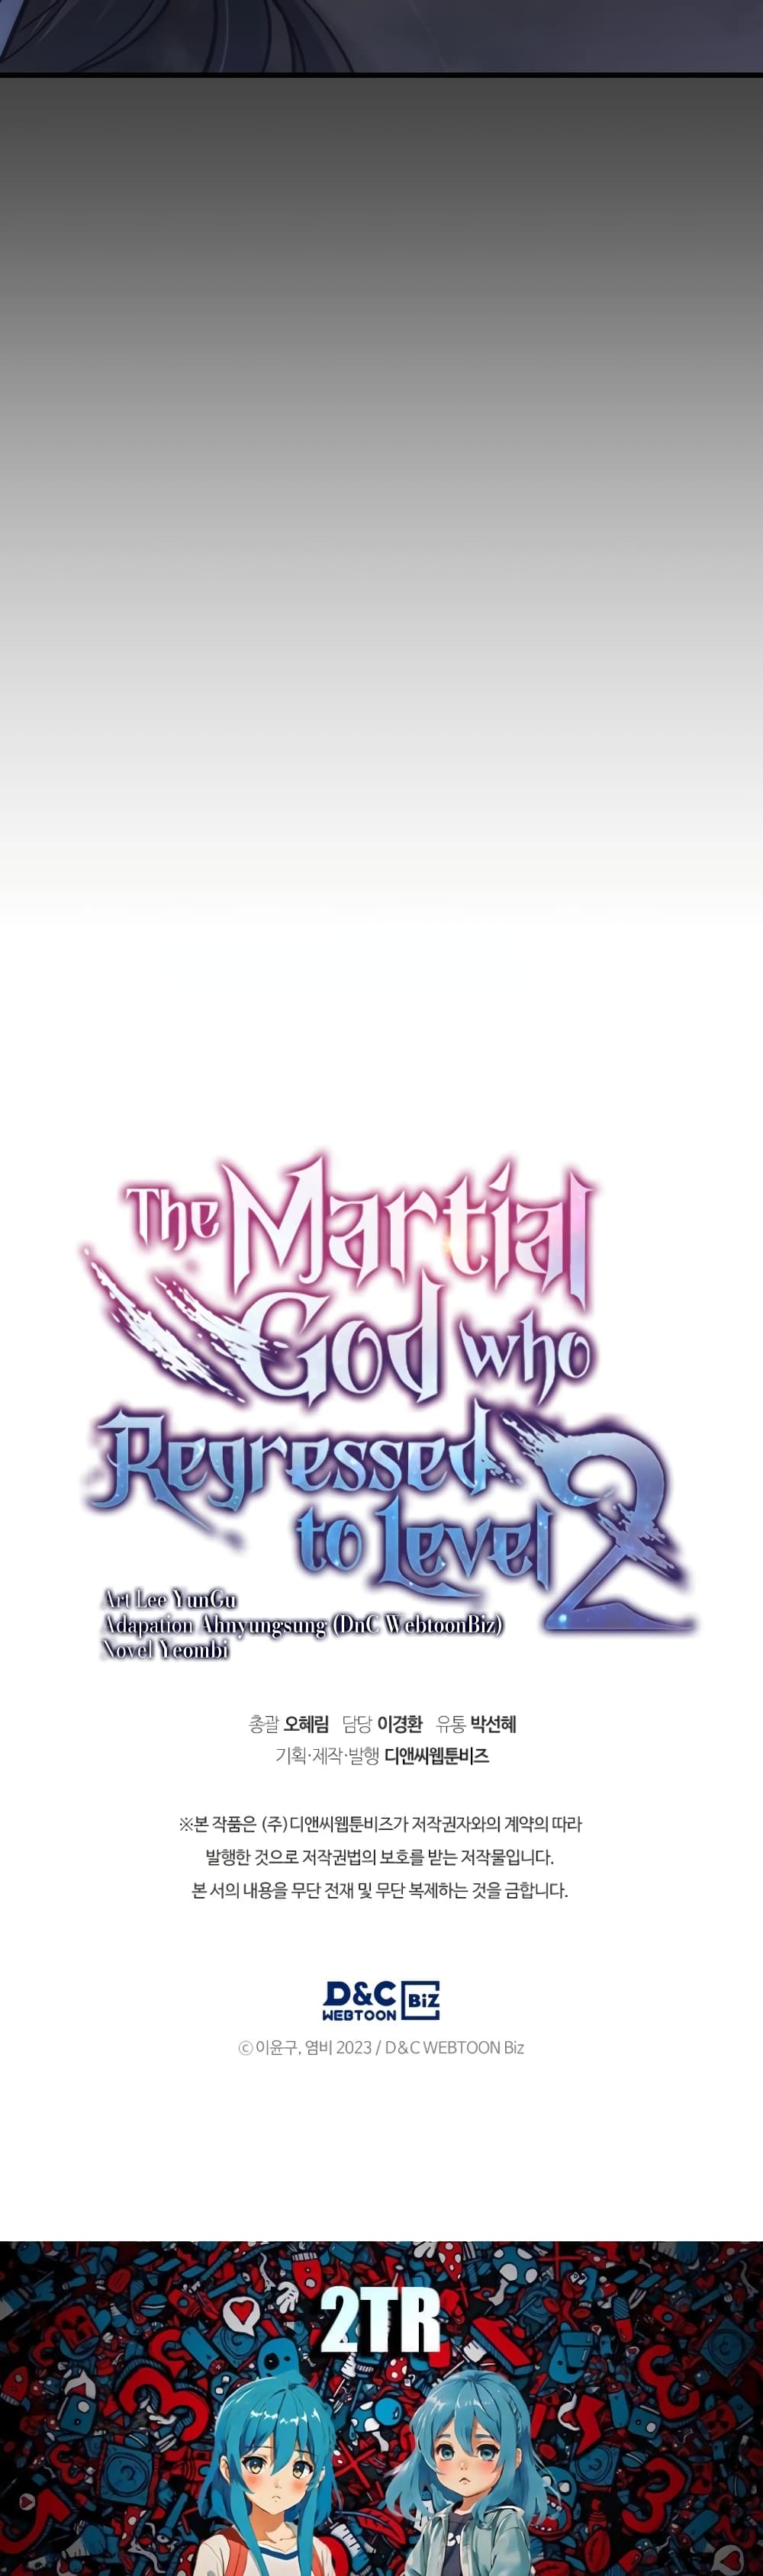 Martial God Regressed to Level 2 16-16